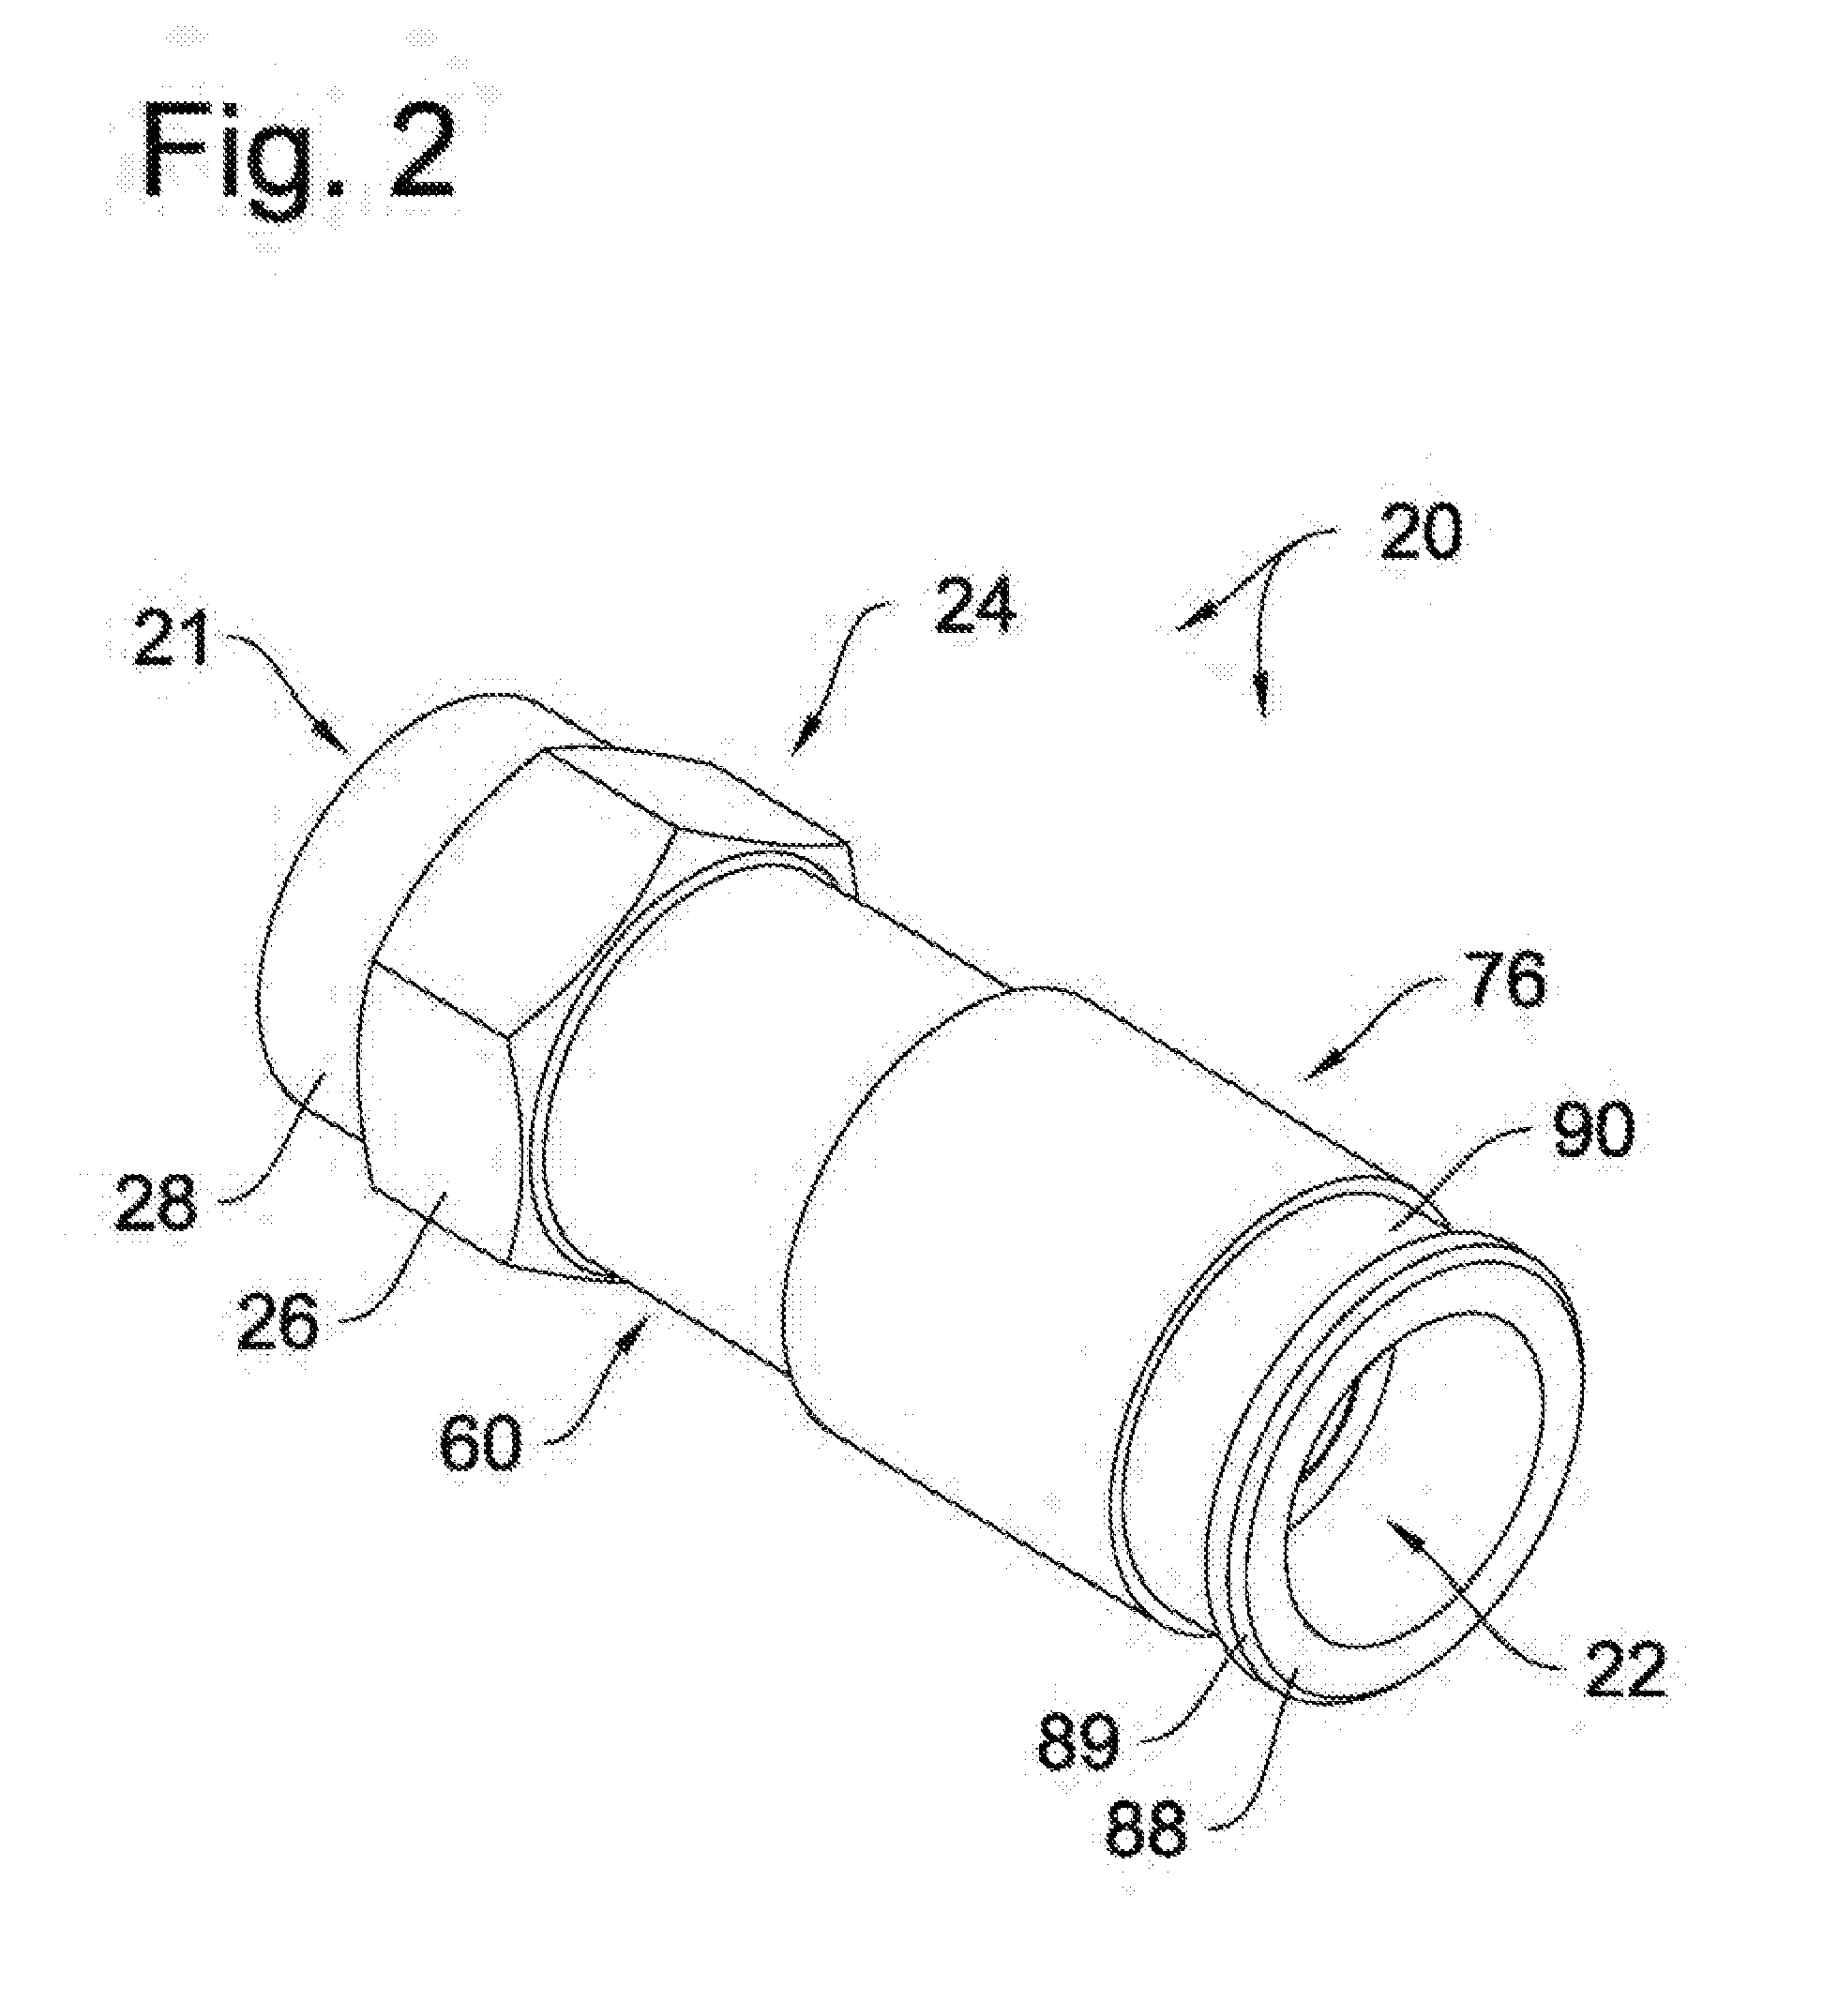 Coaxial connector with grommet biasing for enhanced continuity